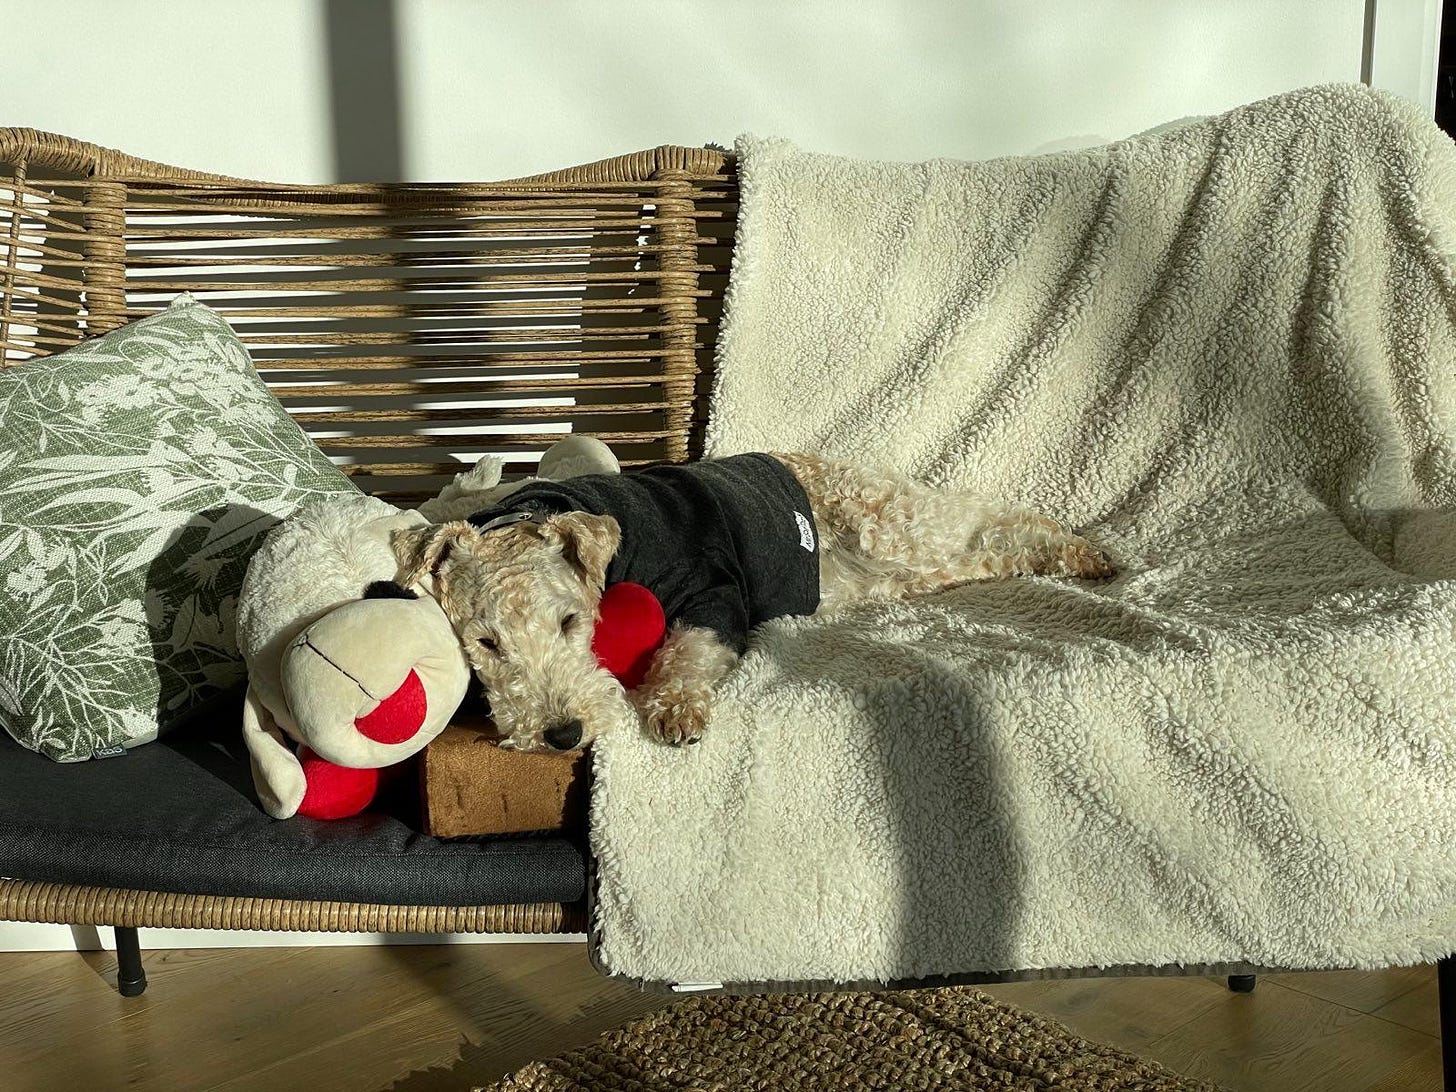 Nutmeg the lakeland terrier lying on a couch in the sun. She is leaning her head on a big soft sheep toy.